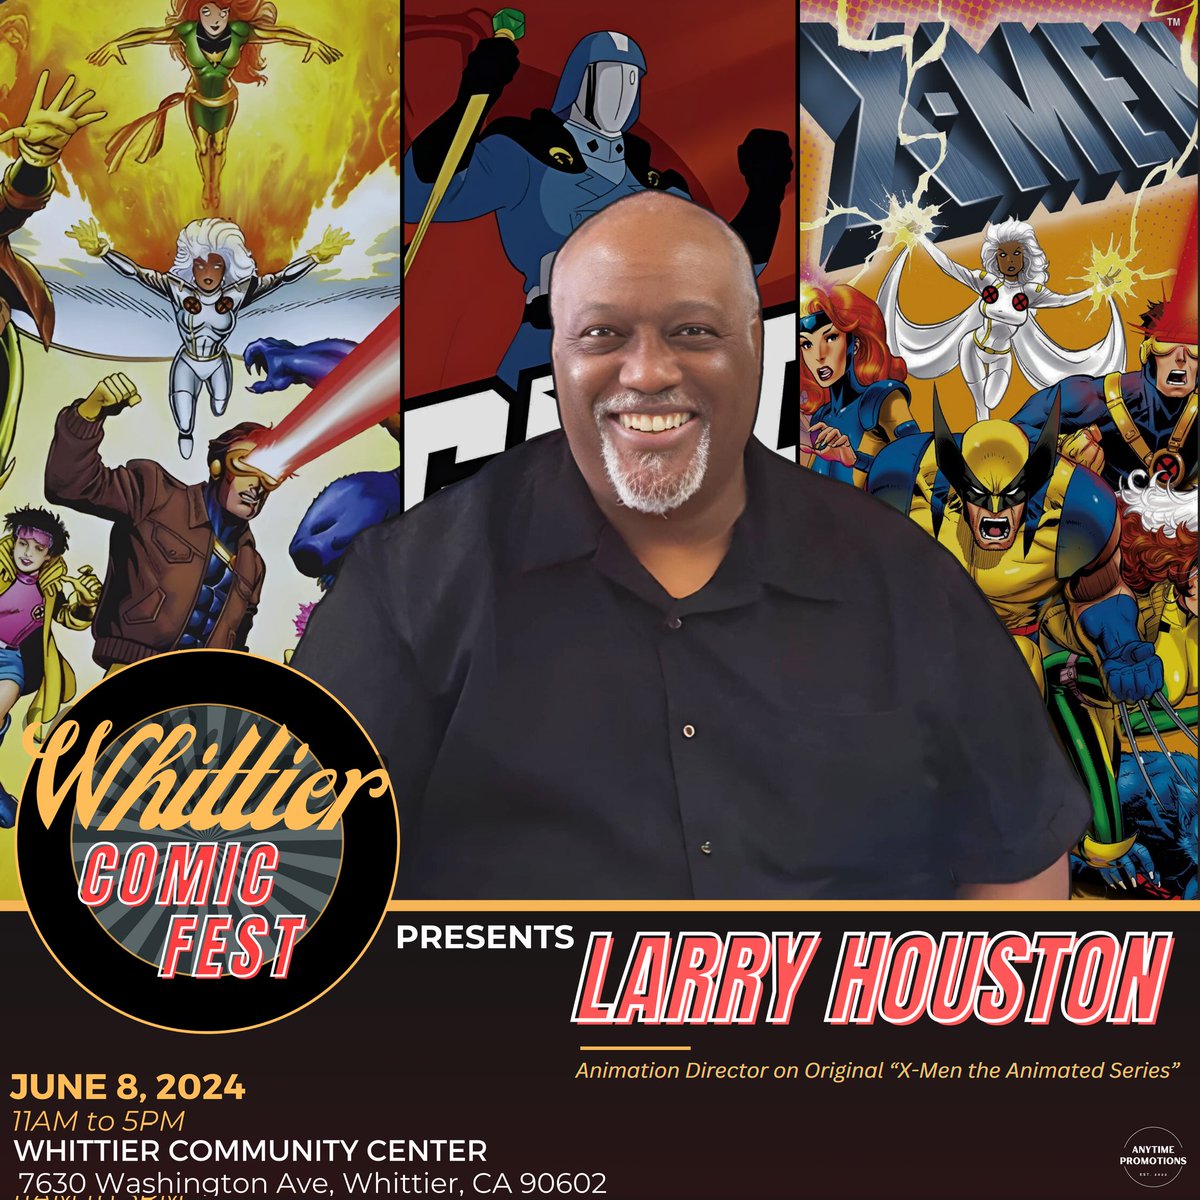 WHITTIER COMIC FEST in Whittier, California! ONE-DAY ONLY. June 8th! I'm looking forward to meeting with the fans of THE X-MEN & the NEW X-MEN'97! SEE YOU THERE. #xmentheanimatedseries #xmen97 #marvel #xmentas #marvelstudios #whittiercomicfest #anytimepromotions